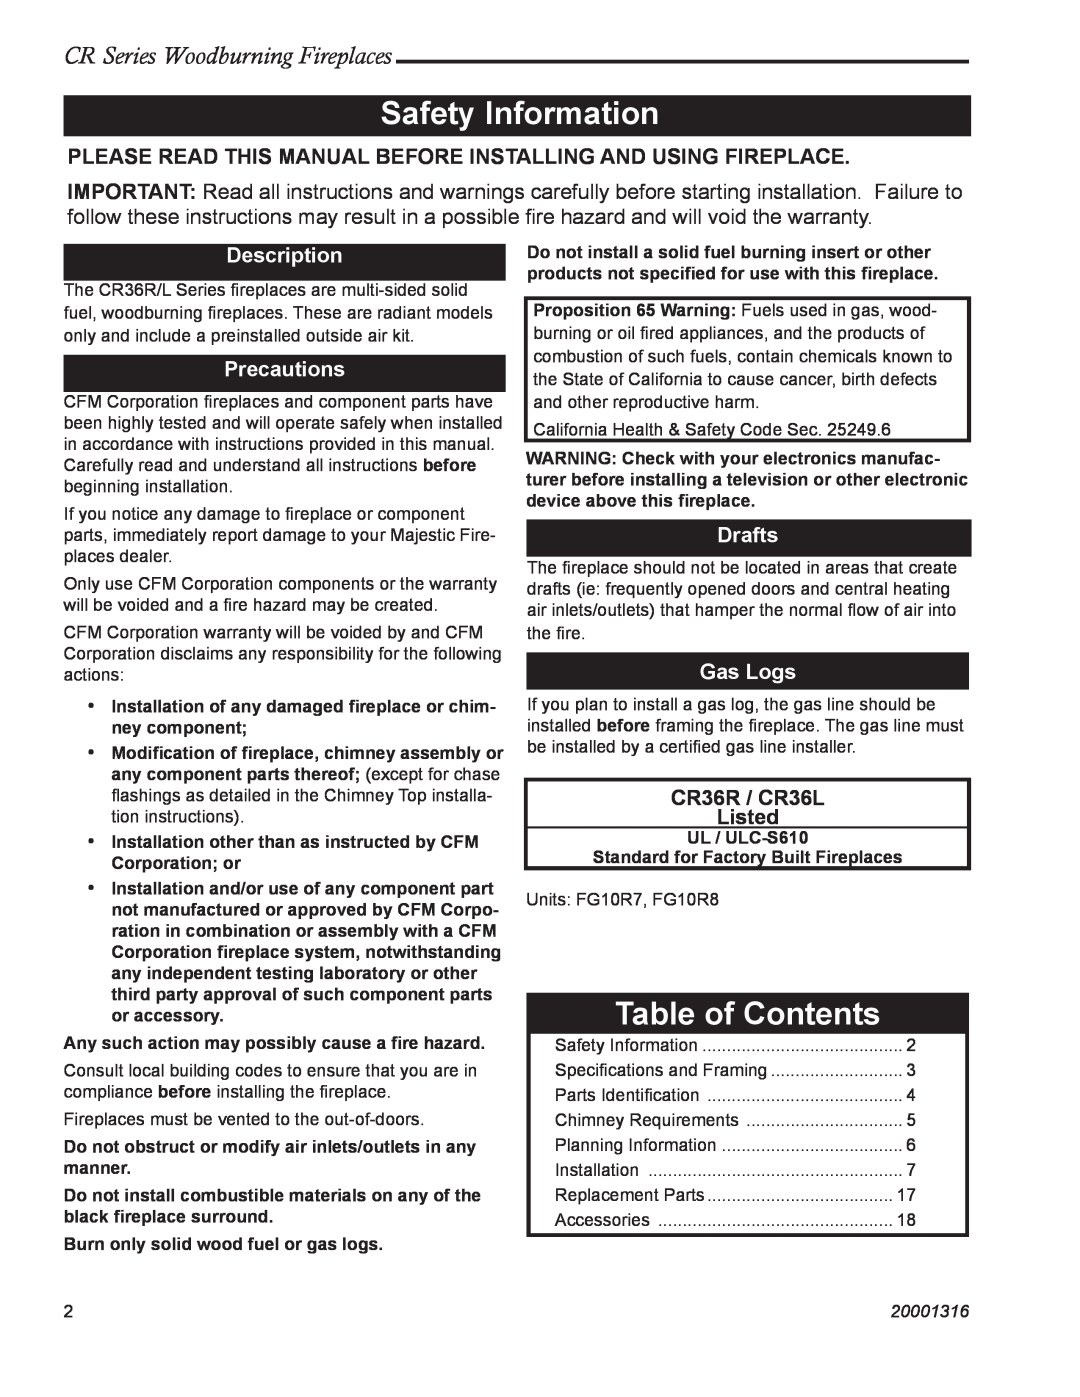 Vermont Casting CR36R Safety Information, Table of Contents, CR Series Woodburning Fireplaces, Description, Precautions 